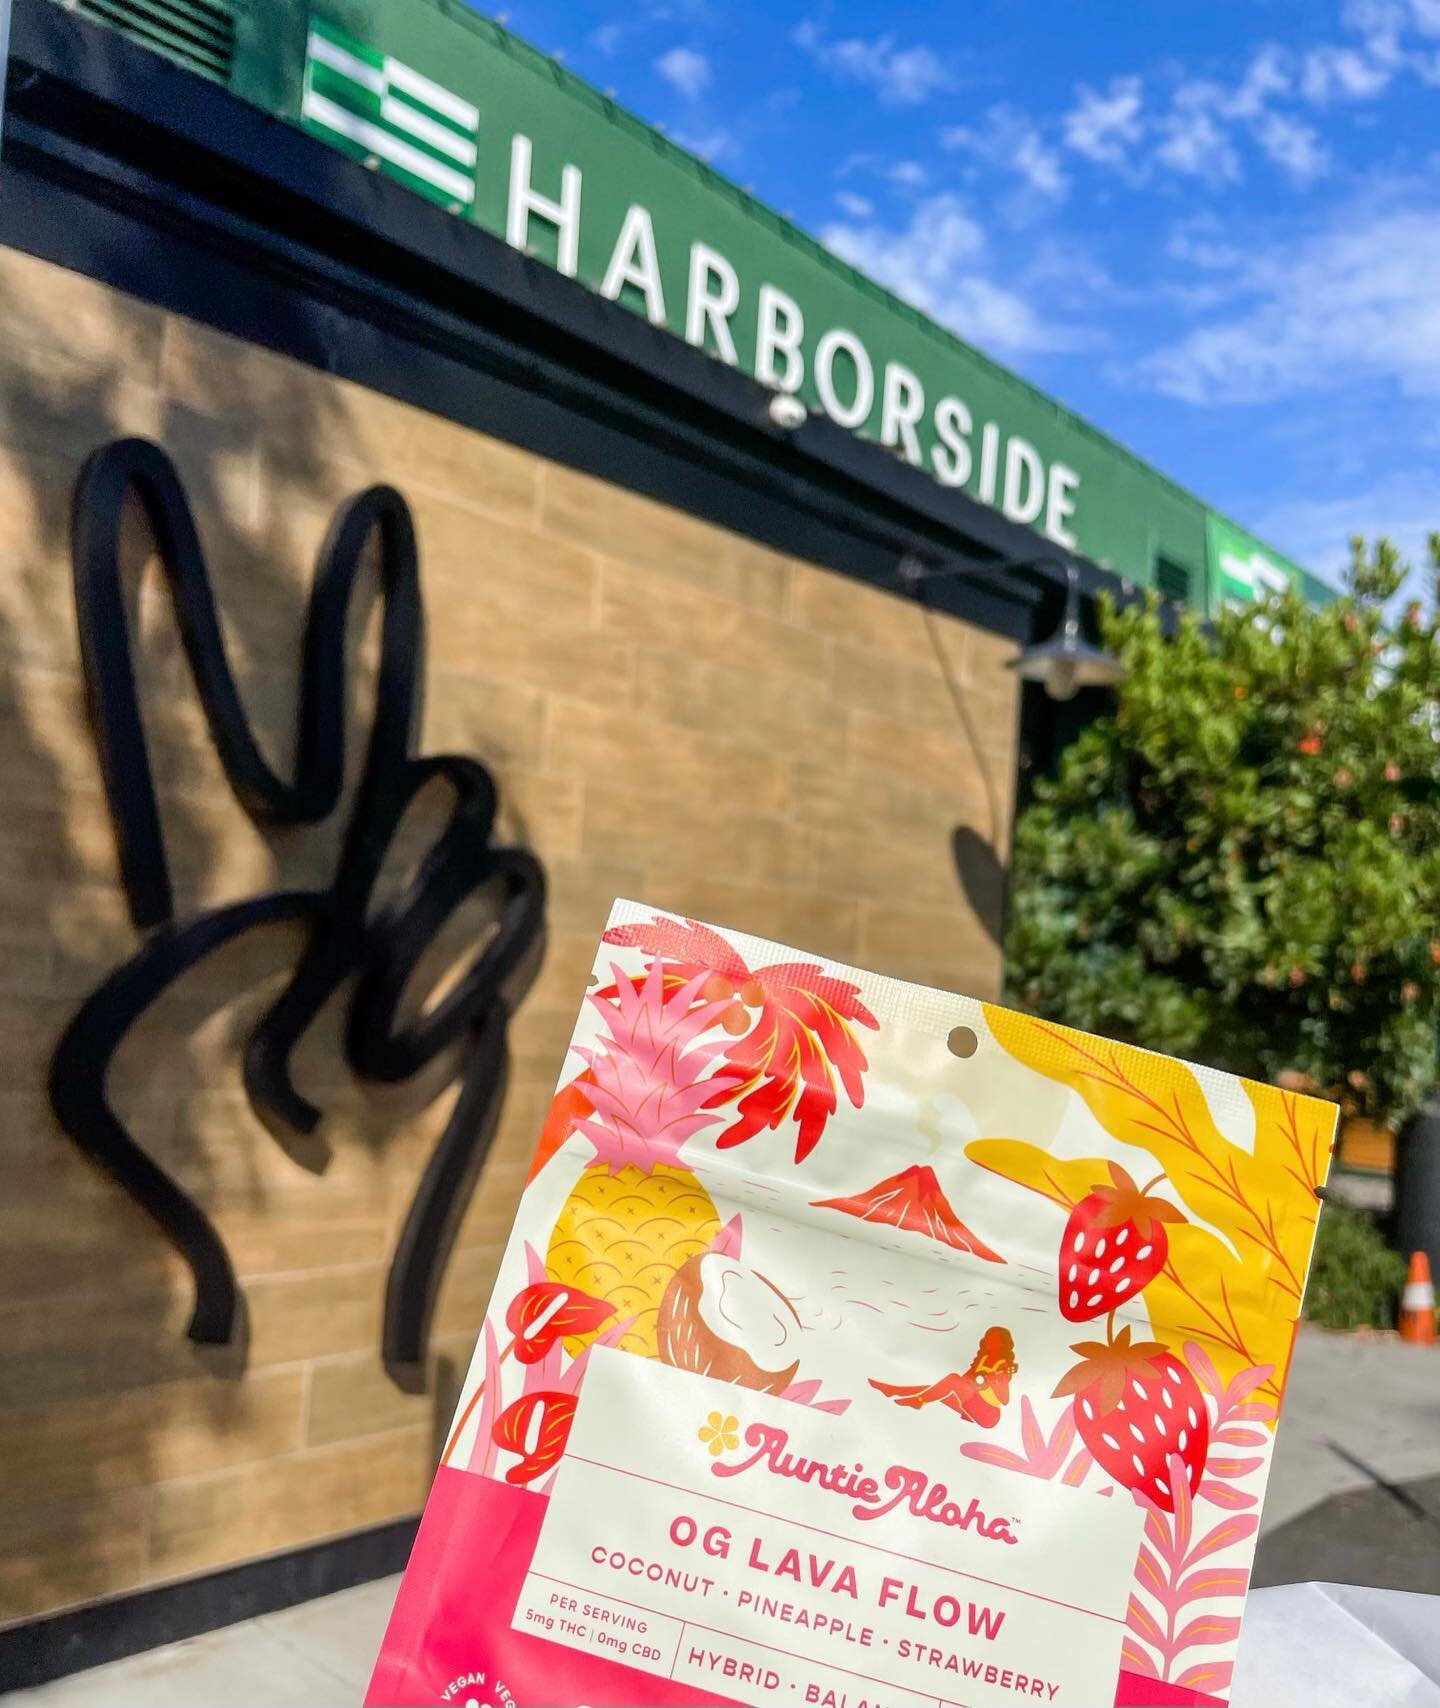 🎉 Join us this weekend for Auntie Aloha&rsquo;s store takeover of HARBORSIDE OAKLAND @shopharborside this Saturday, August 13 

We&rsquo;re bringing the Aloha vibes to Oakland:
🔸Enjoy FREE Hawaiian shave ice 🍧 from 11:30am - 4:30pm PST*
🔸 Get Aun